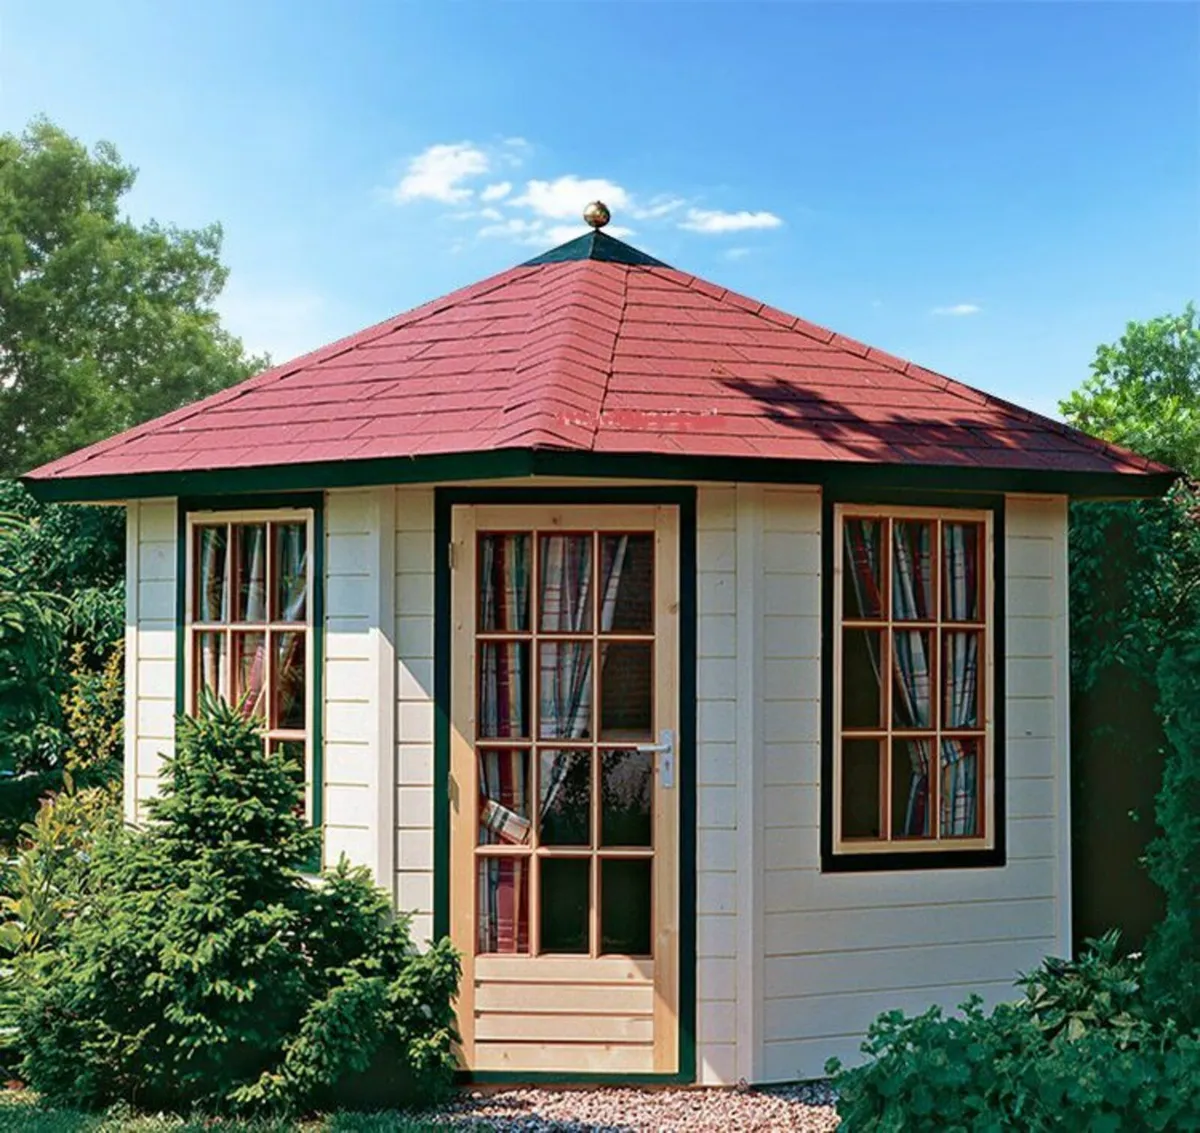 Clearance sale on Garden rooms , Final Reductions! - Image 1